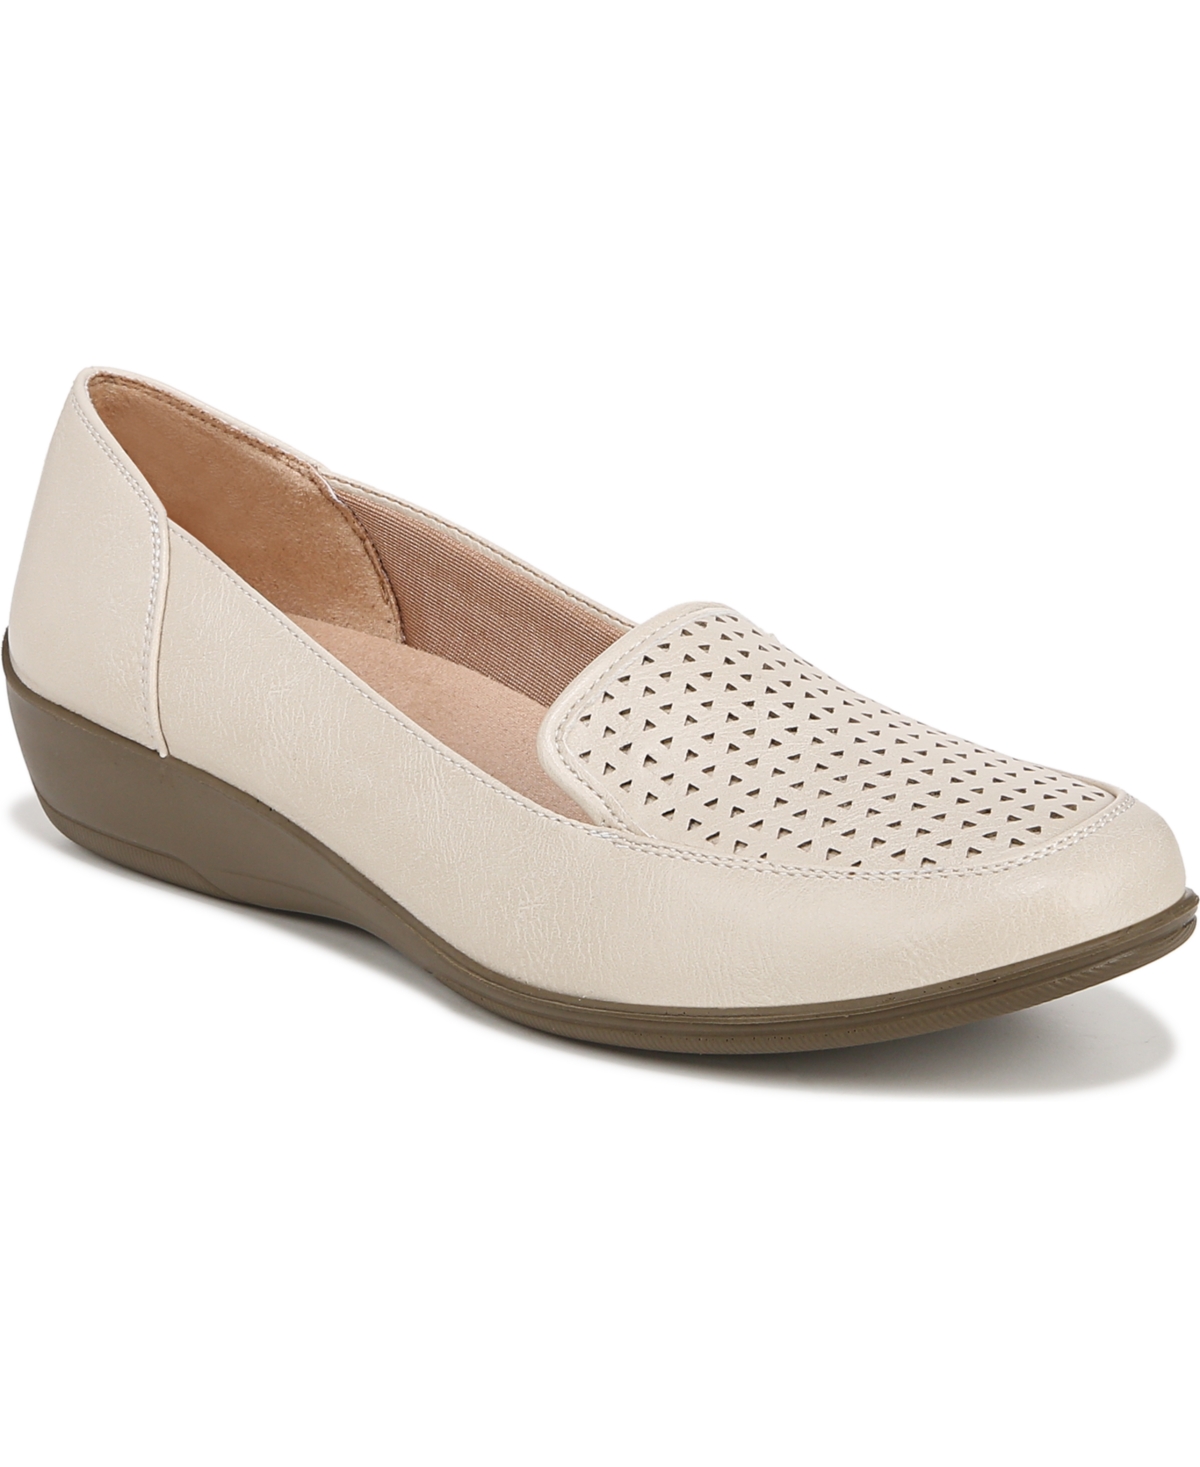 Shop Lifestride Women's India Slip On Loafers In Beige Faux Leather